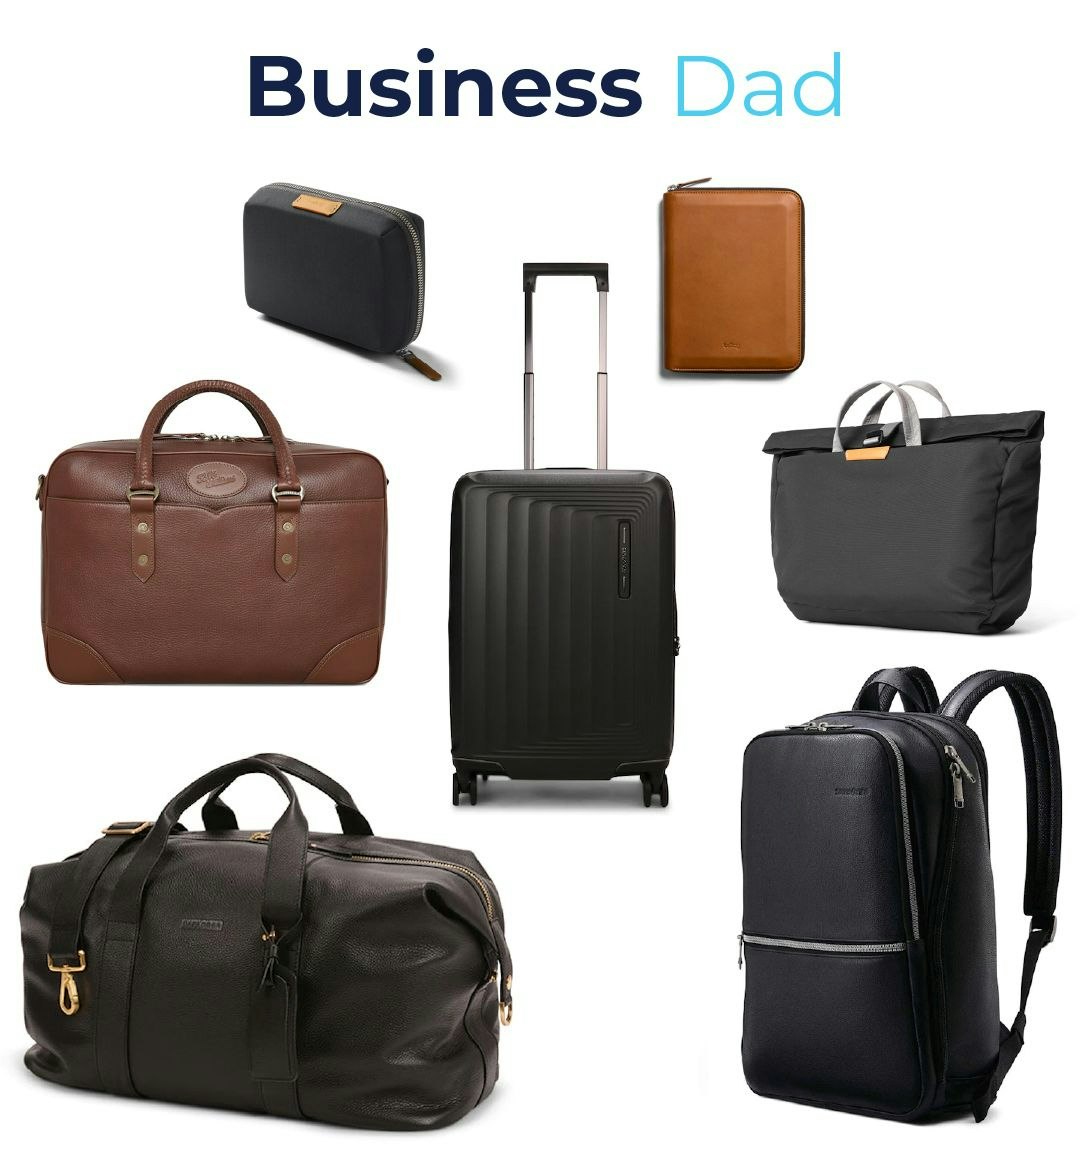 Product images of gift ideas for a Business Dad